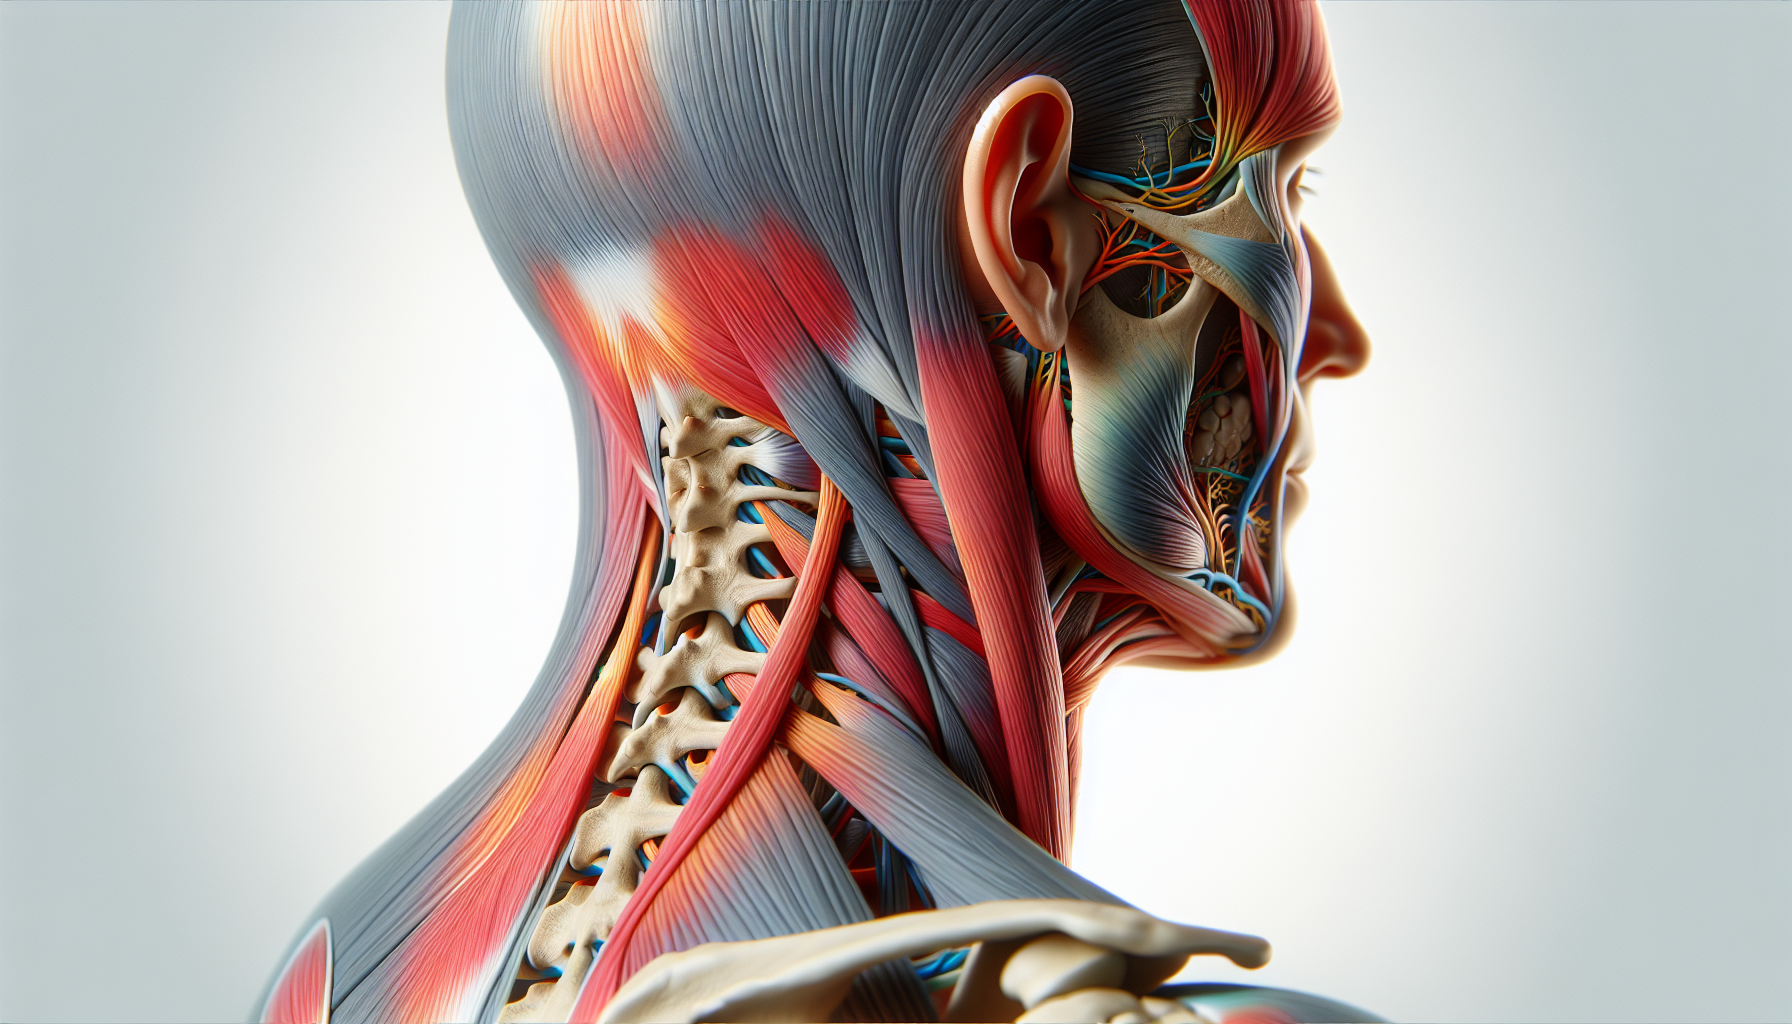 Illustration of a human neck with highlighted muscles and nerves